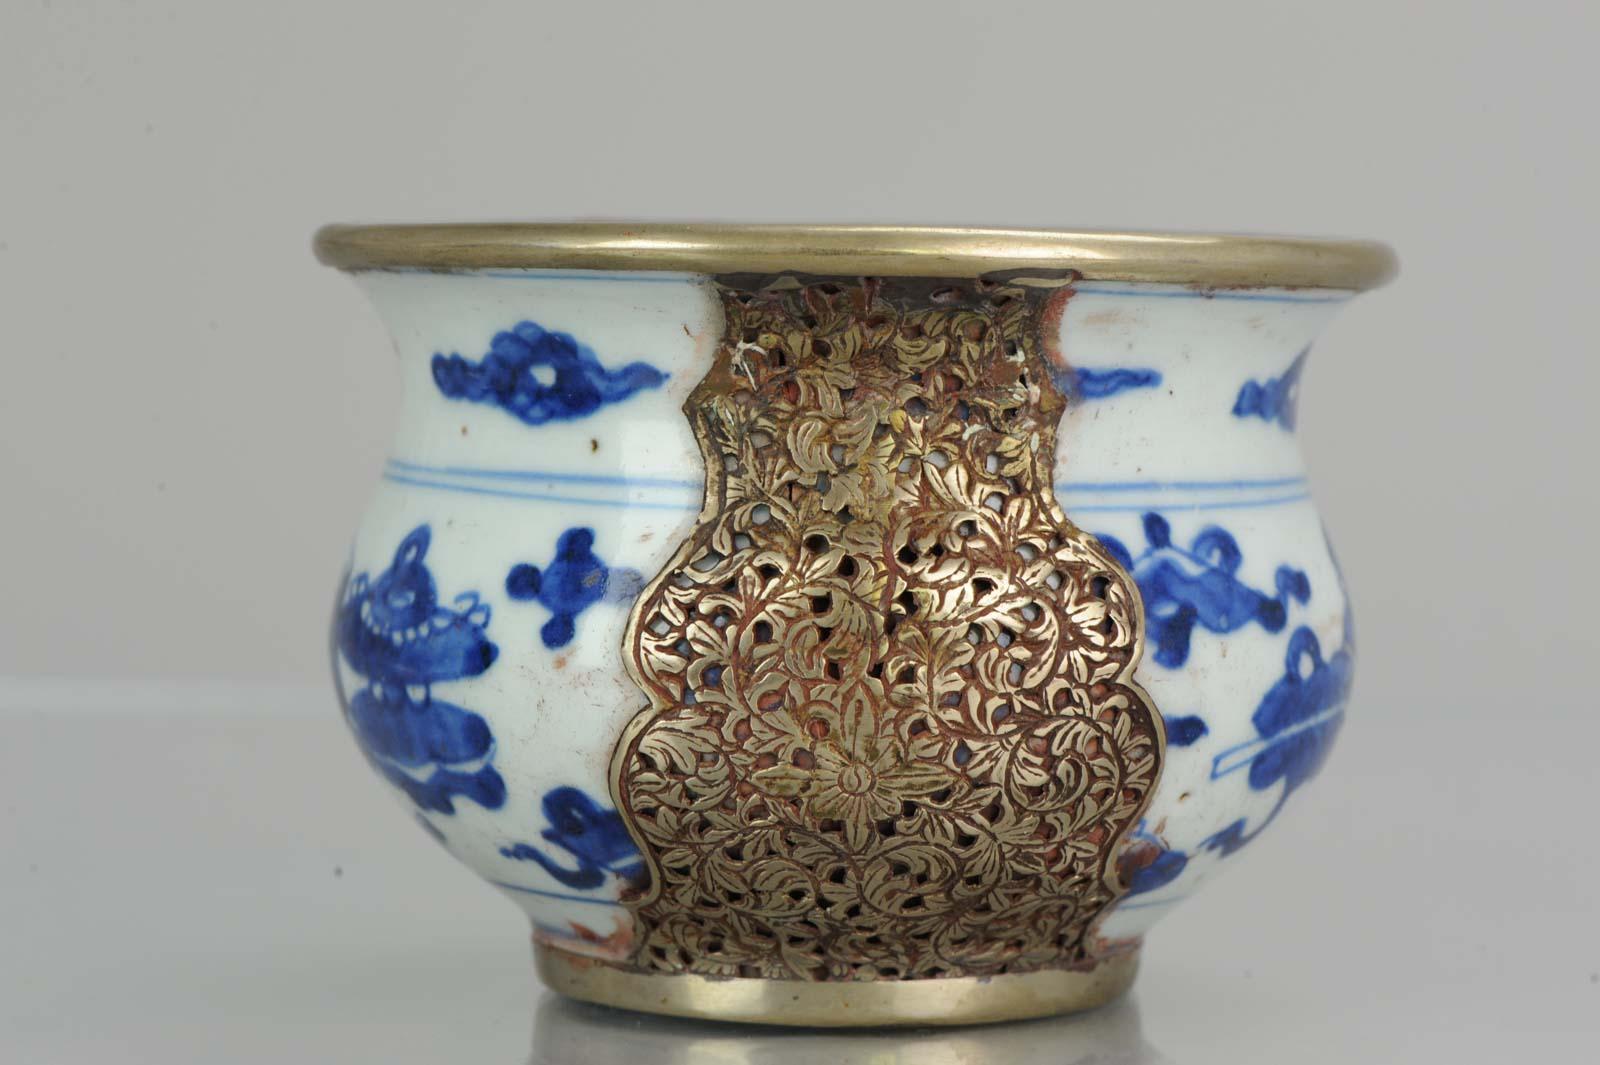 A very nice bowl. Transitional or early Kangxi period.

Nice and beautiful addition all-over the bowl and a nice symbol in the interior. The bowl came from a lot of Bleu de Hue porcelain so more than probably the additions were done in South East